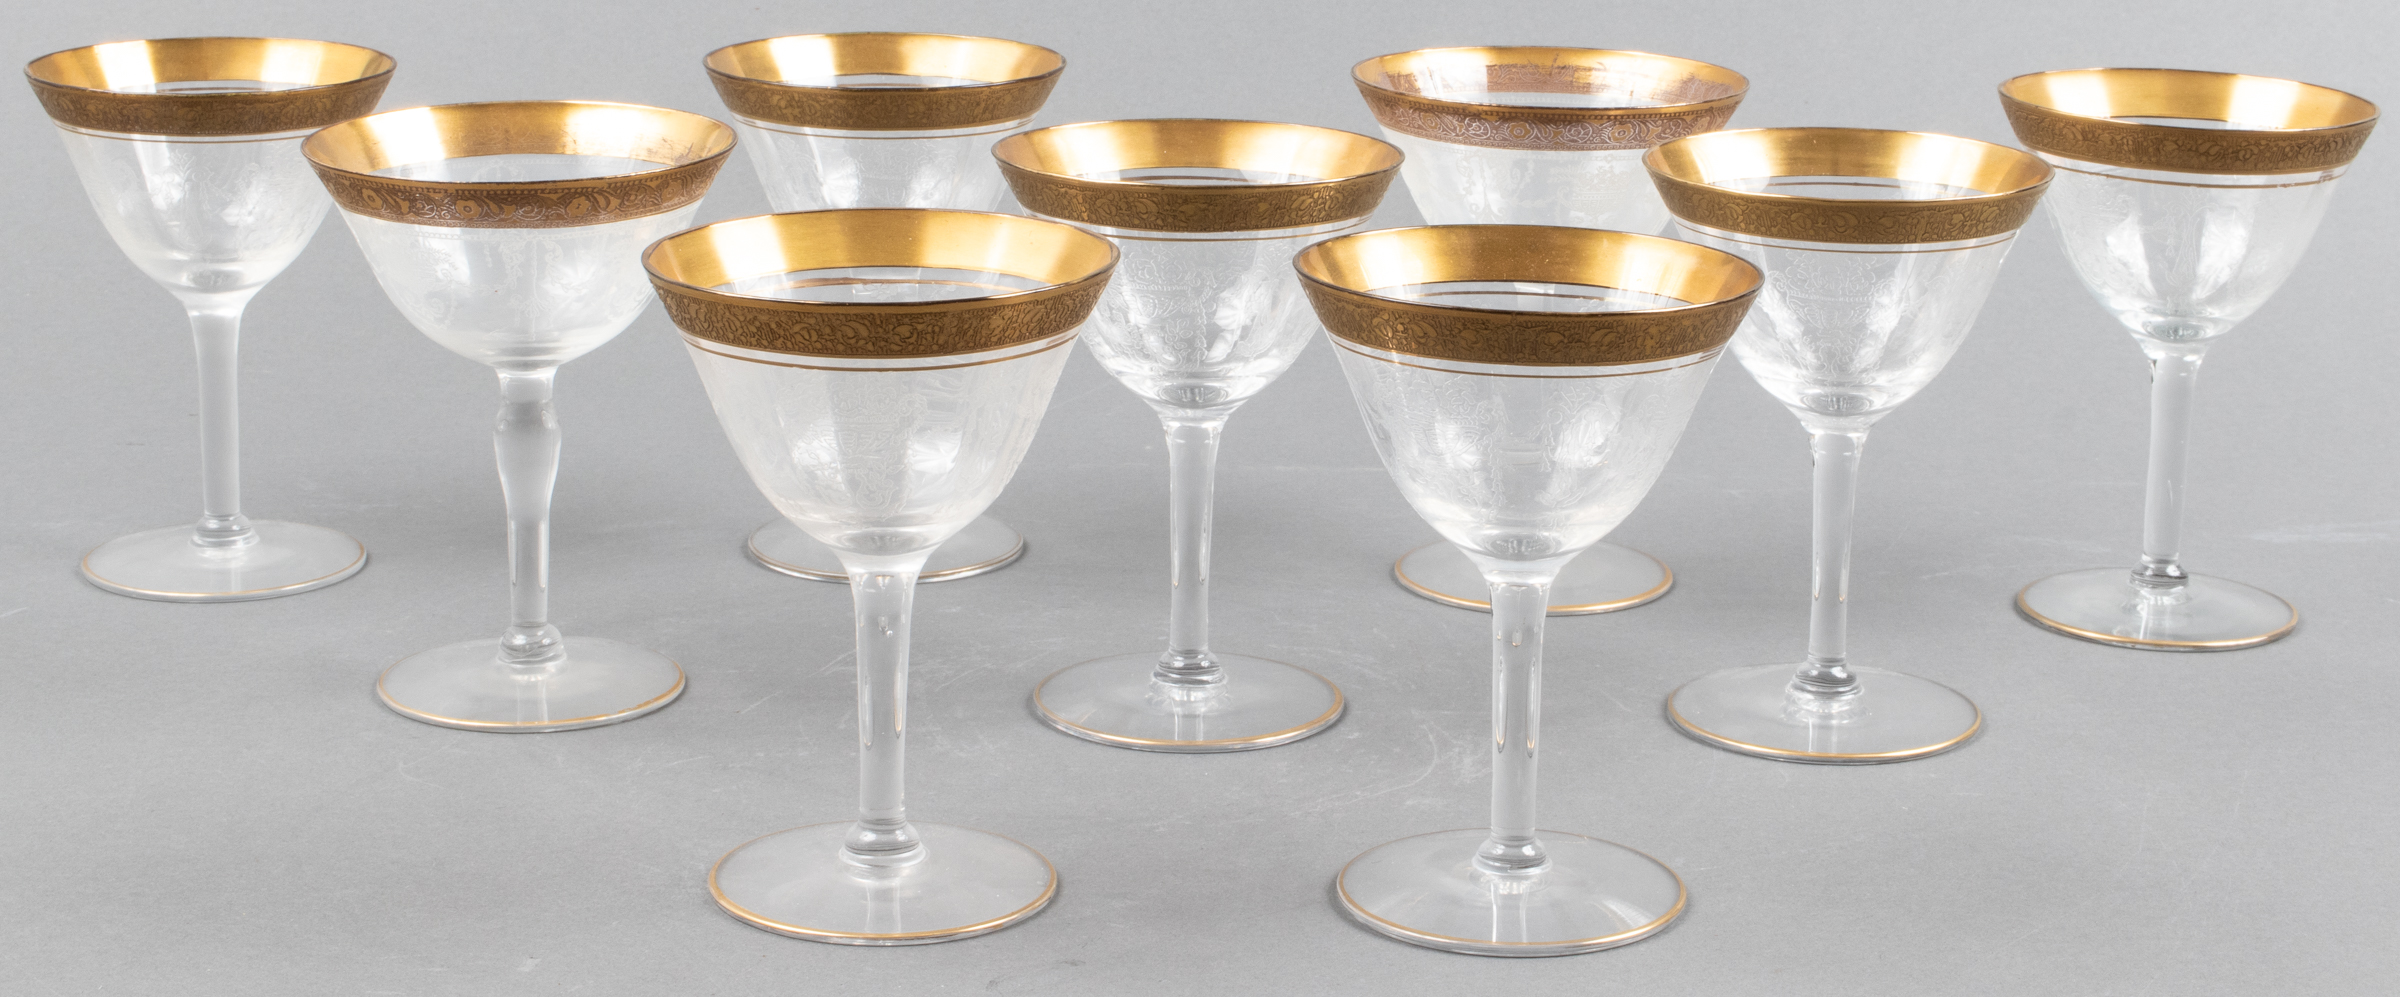 ETCHED AND GILT CHAMPAGNE STEMWARE  3c36d9